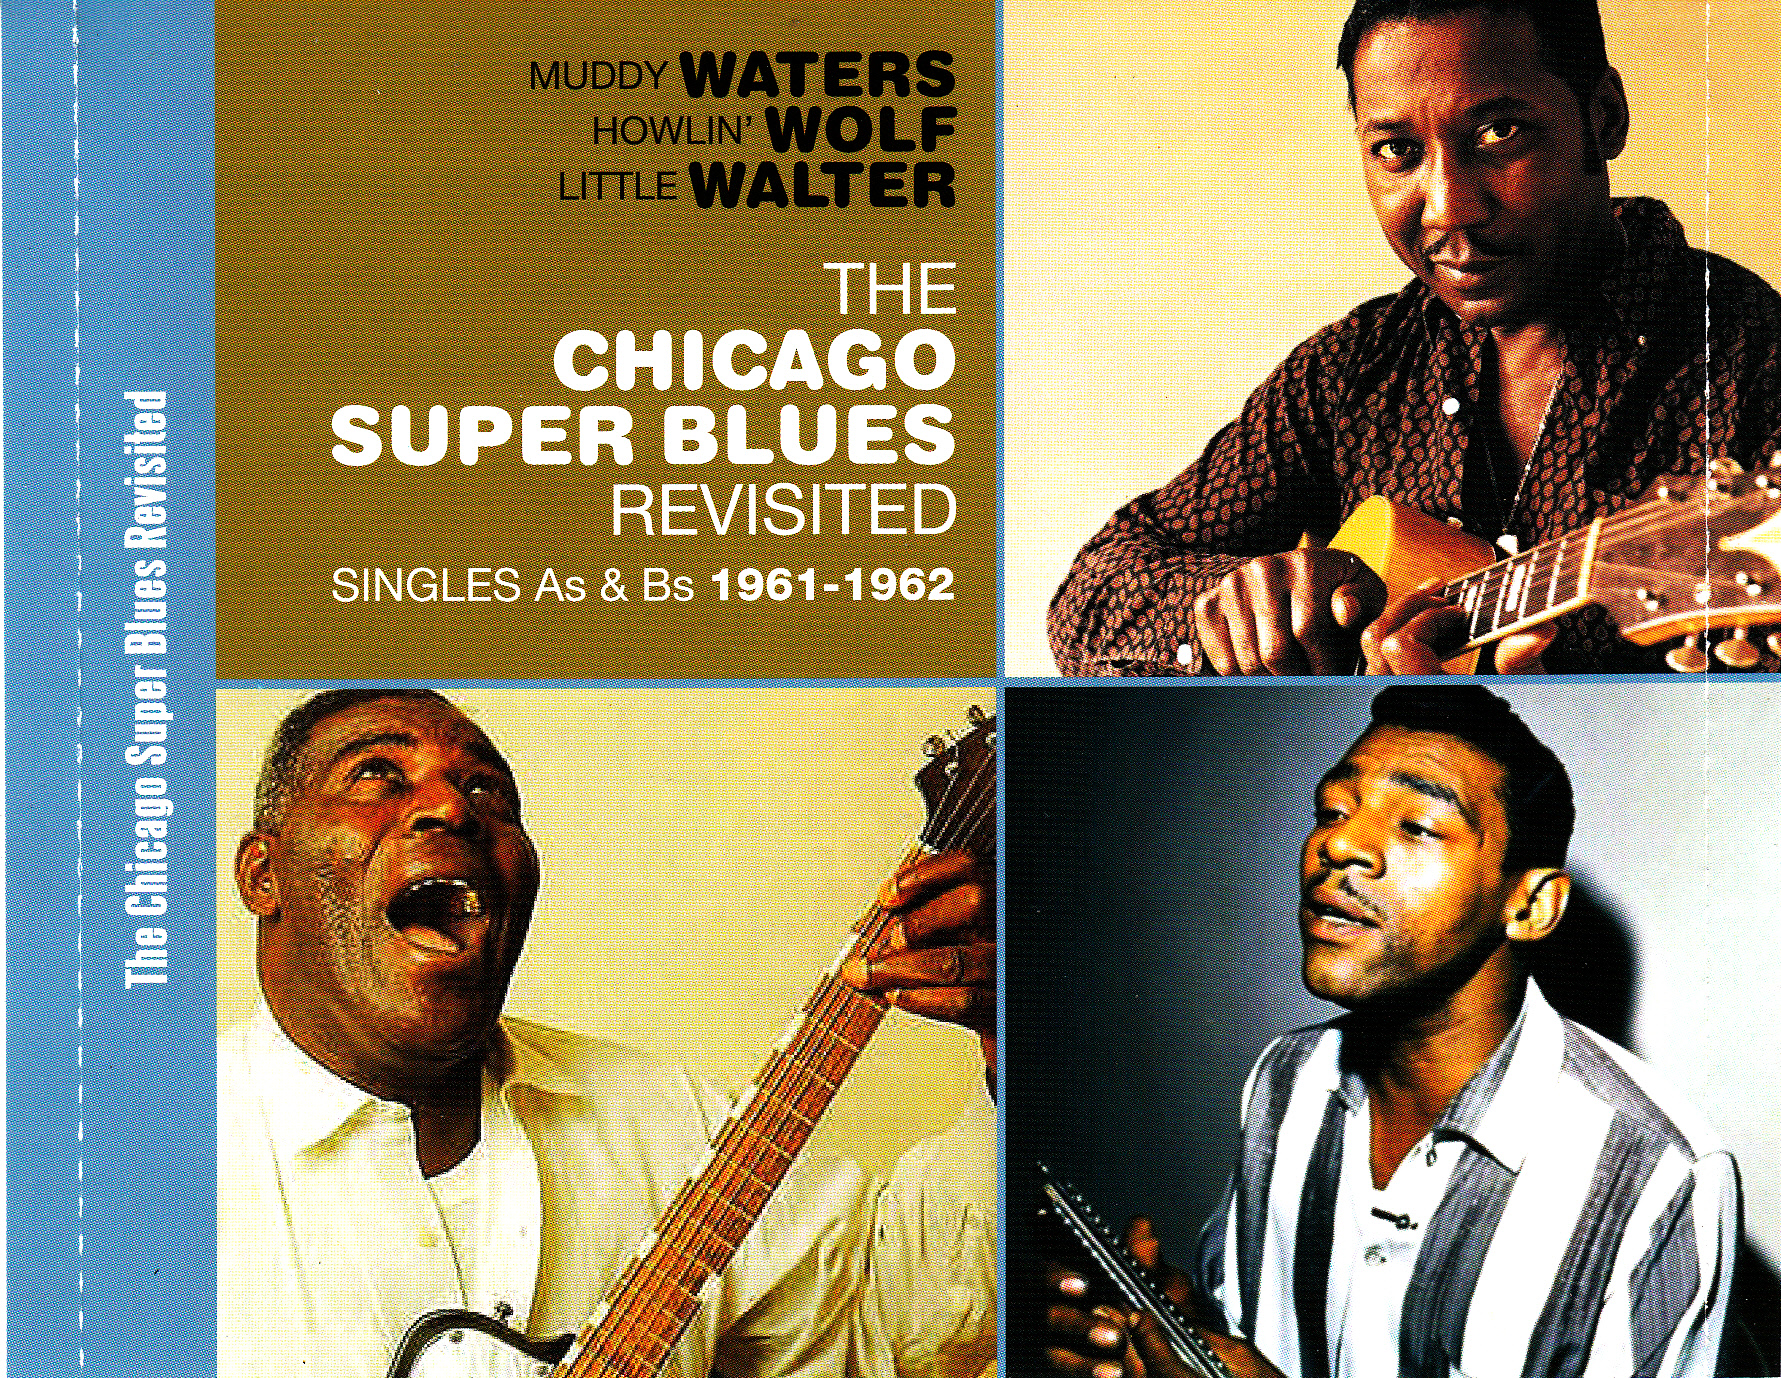 Muddy Waters Howlin' Wolf ... Chicago Super Blues Revisited